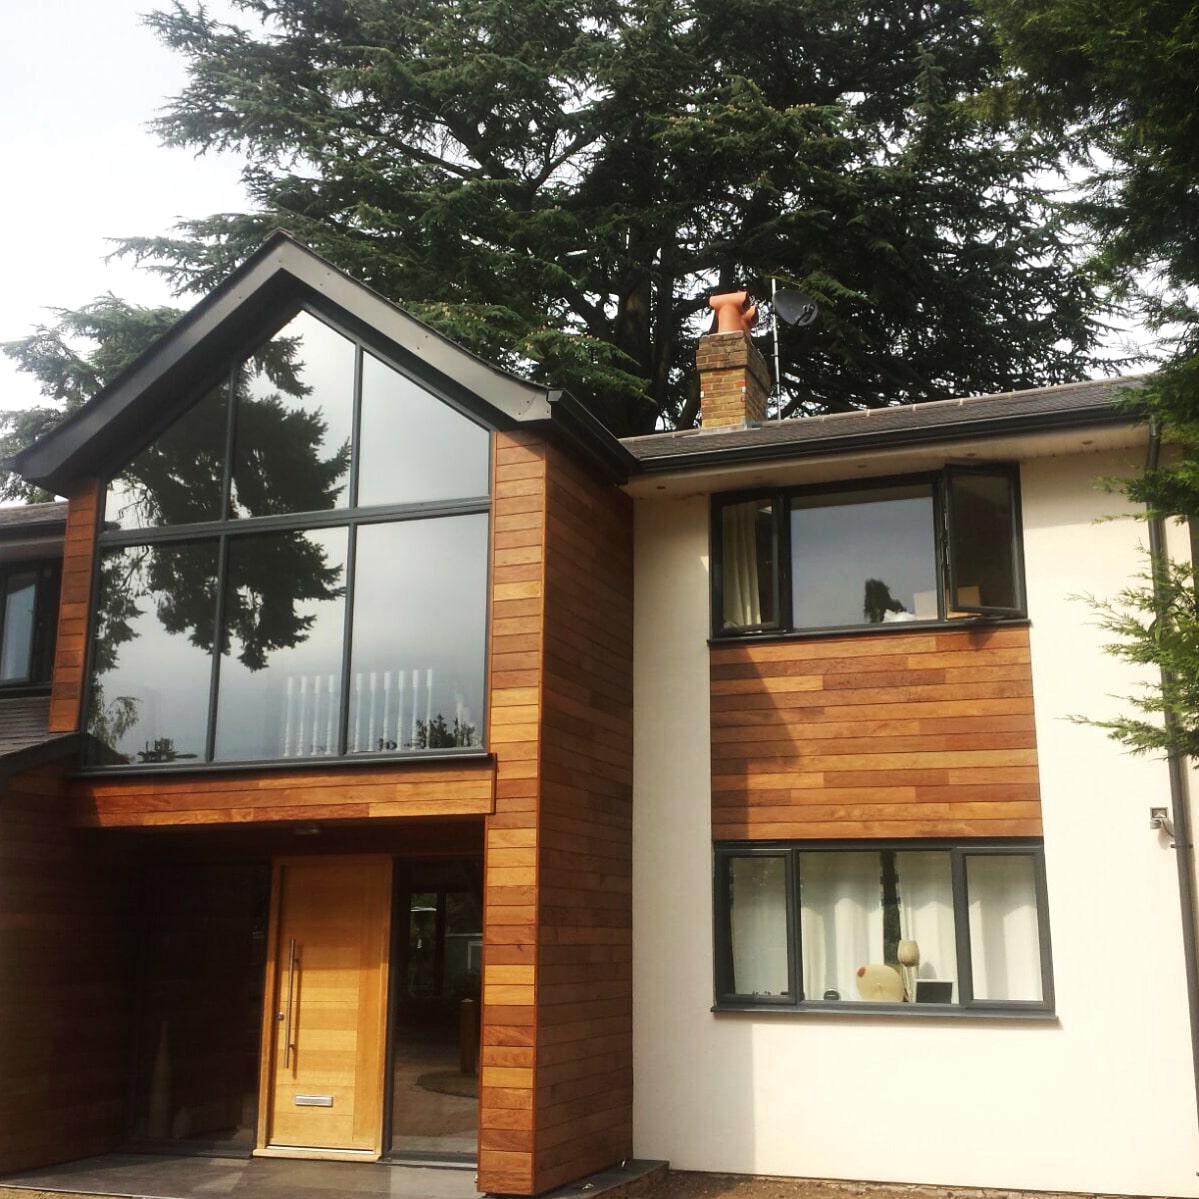 Ipe Cladding and Decking